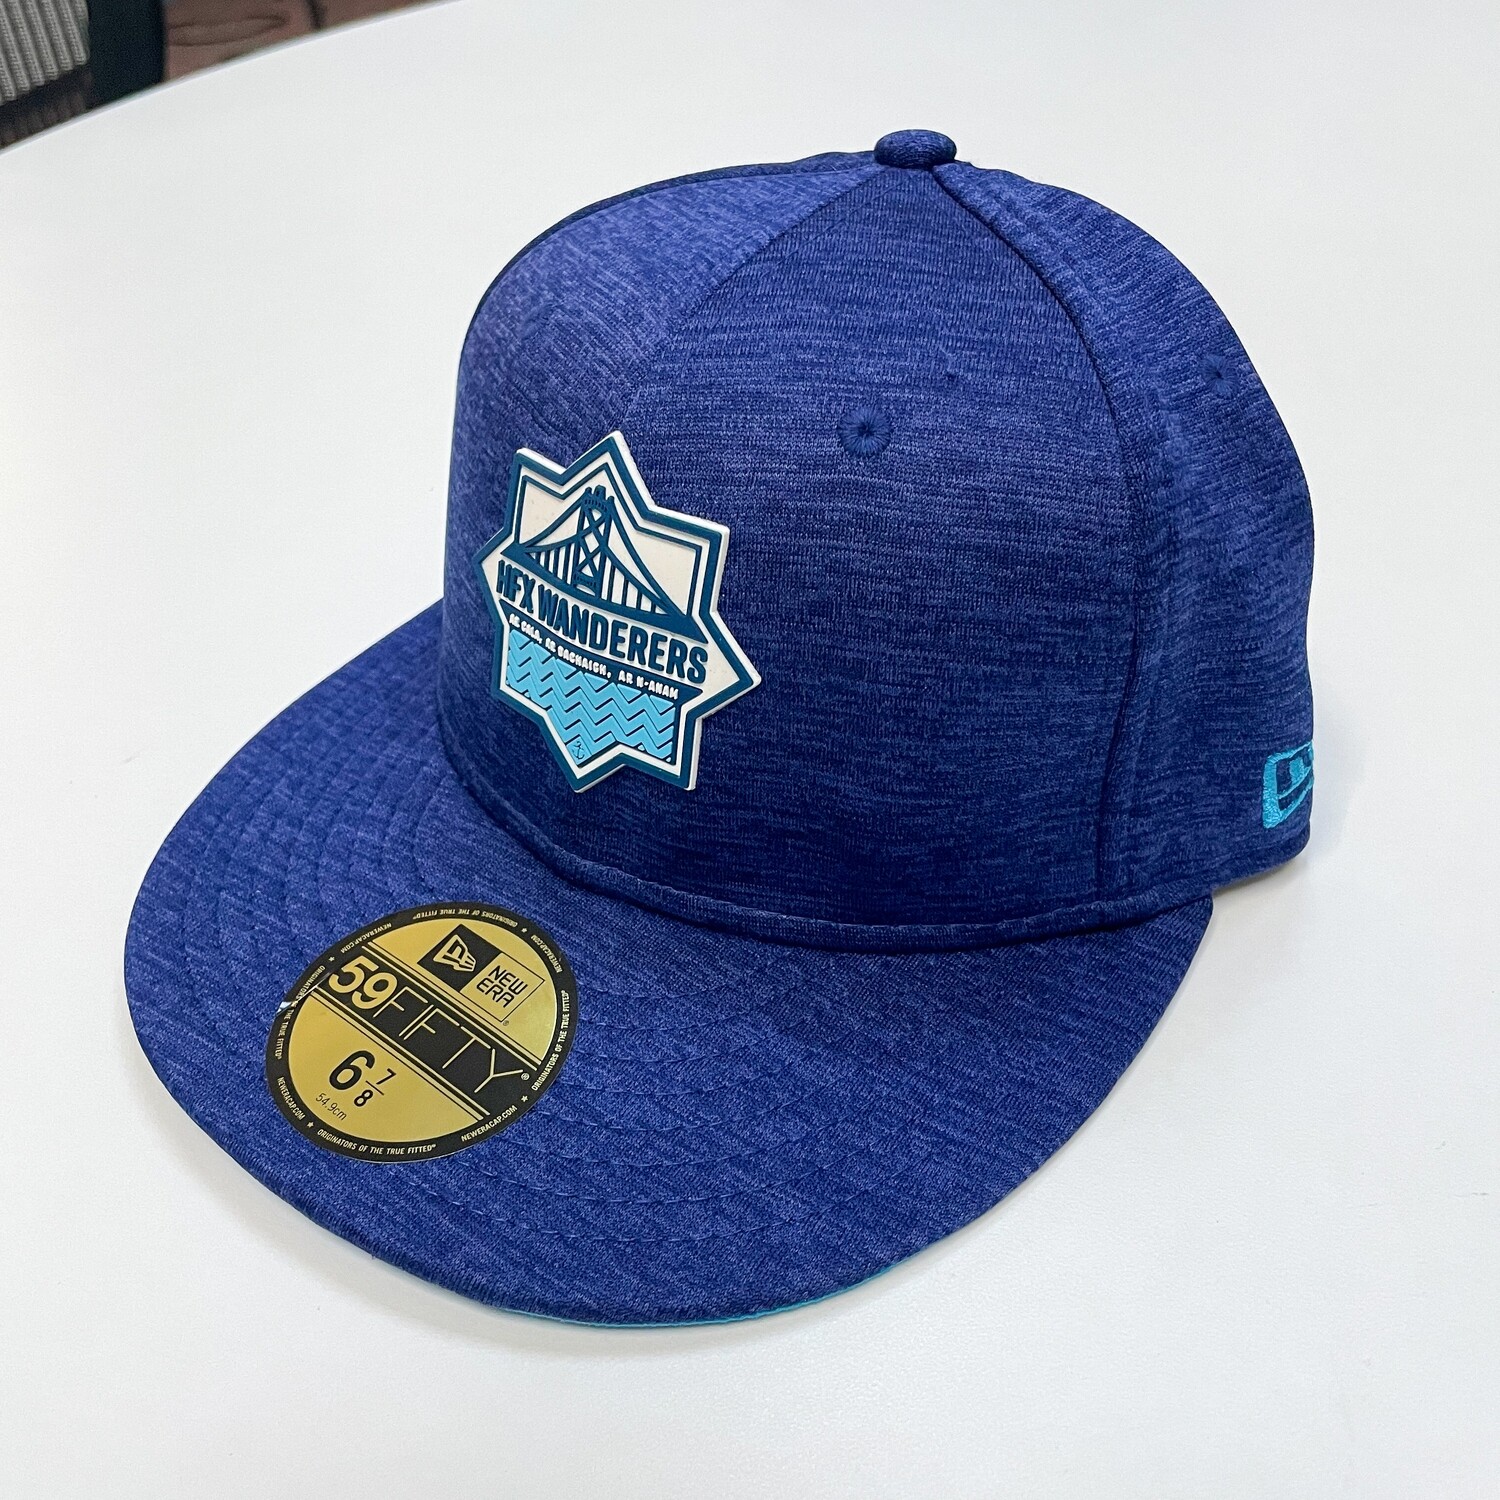 New Era 59Fifty Fitted Navy